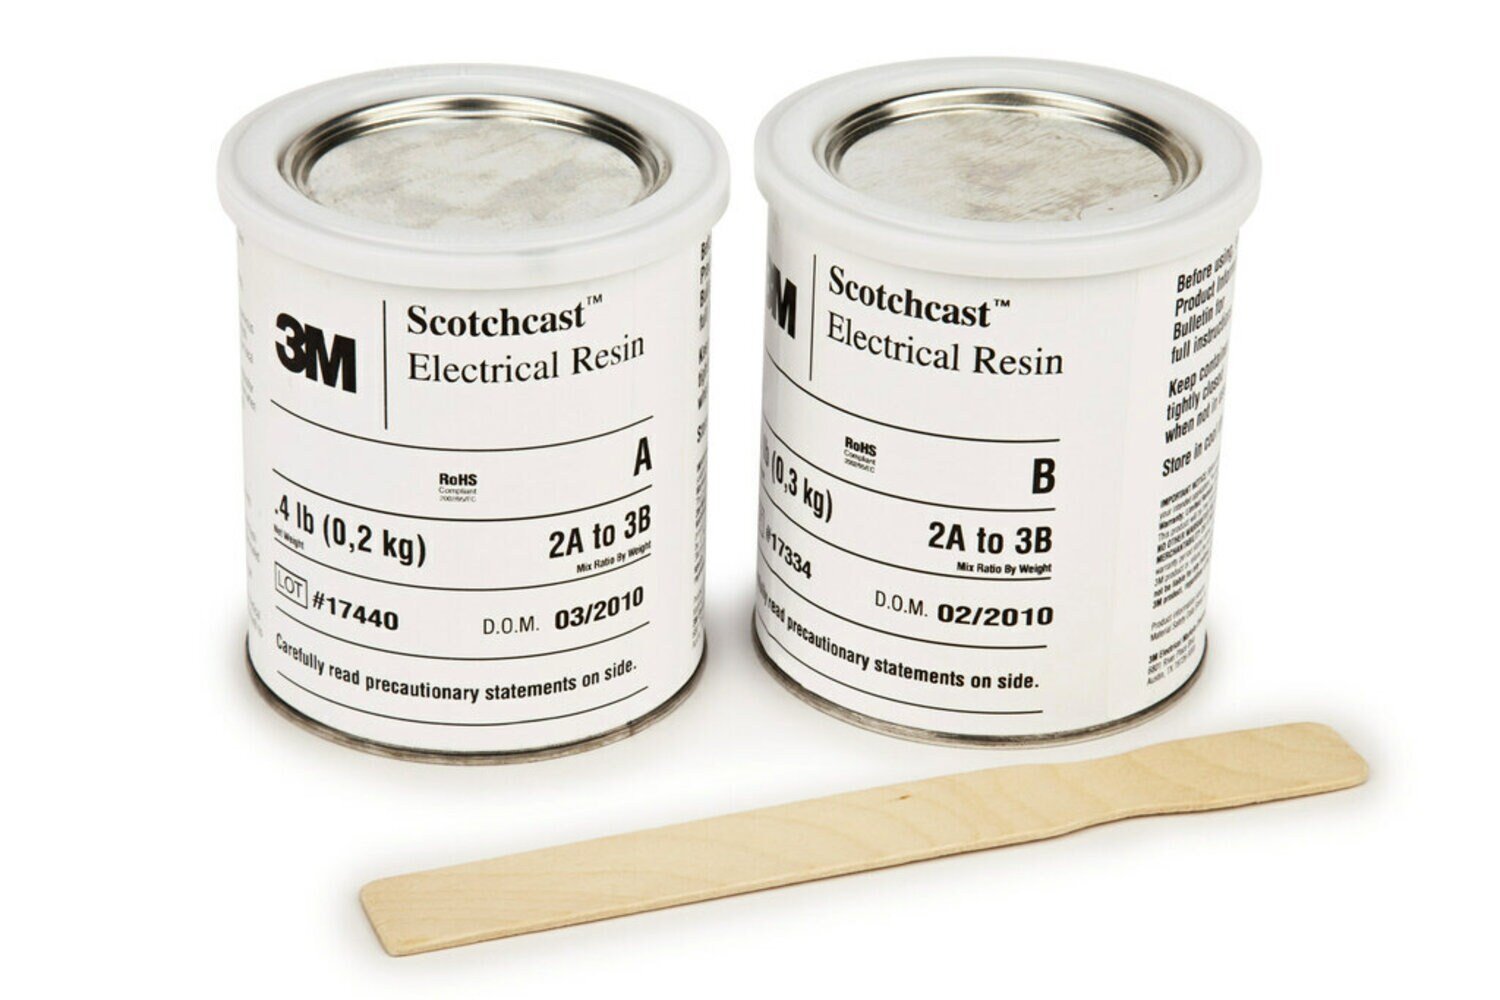 7010417234 - 3M Scotchcast Electrical Resin 210N, 8-lb kit (two 1-gal cans, 2
paddles), 1 Kits/Case